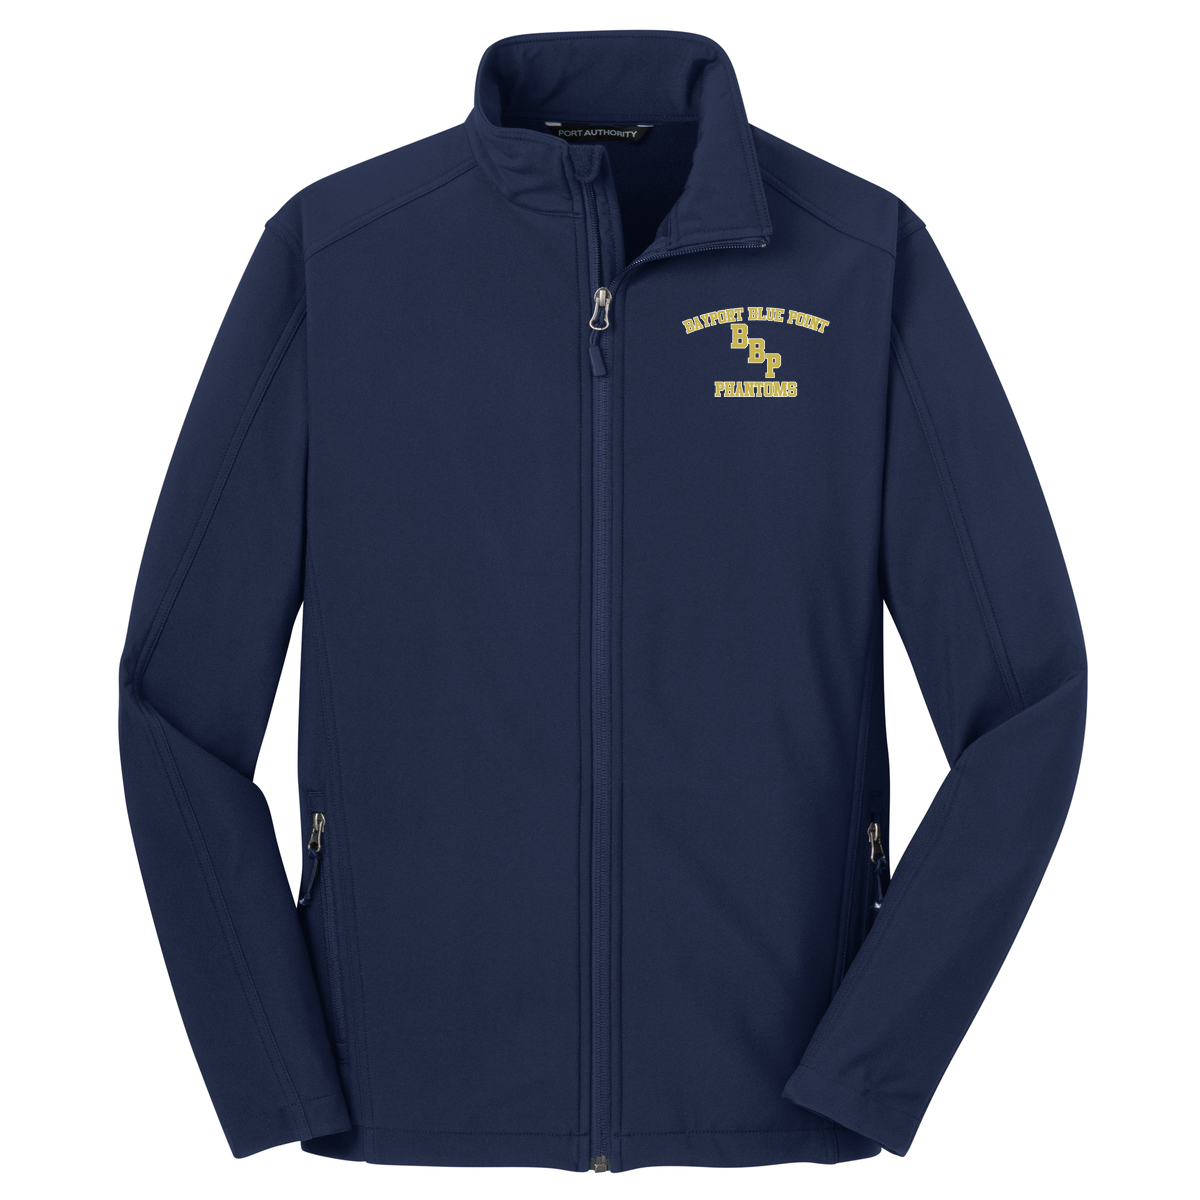 BBP Booster Club Soft Shell Jacket